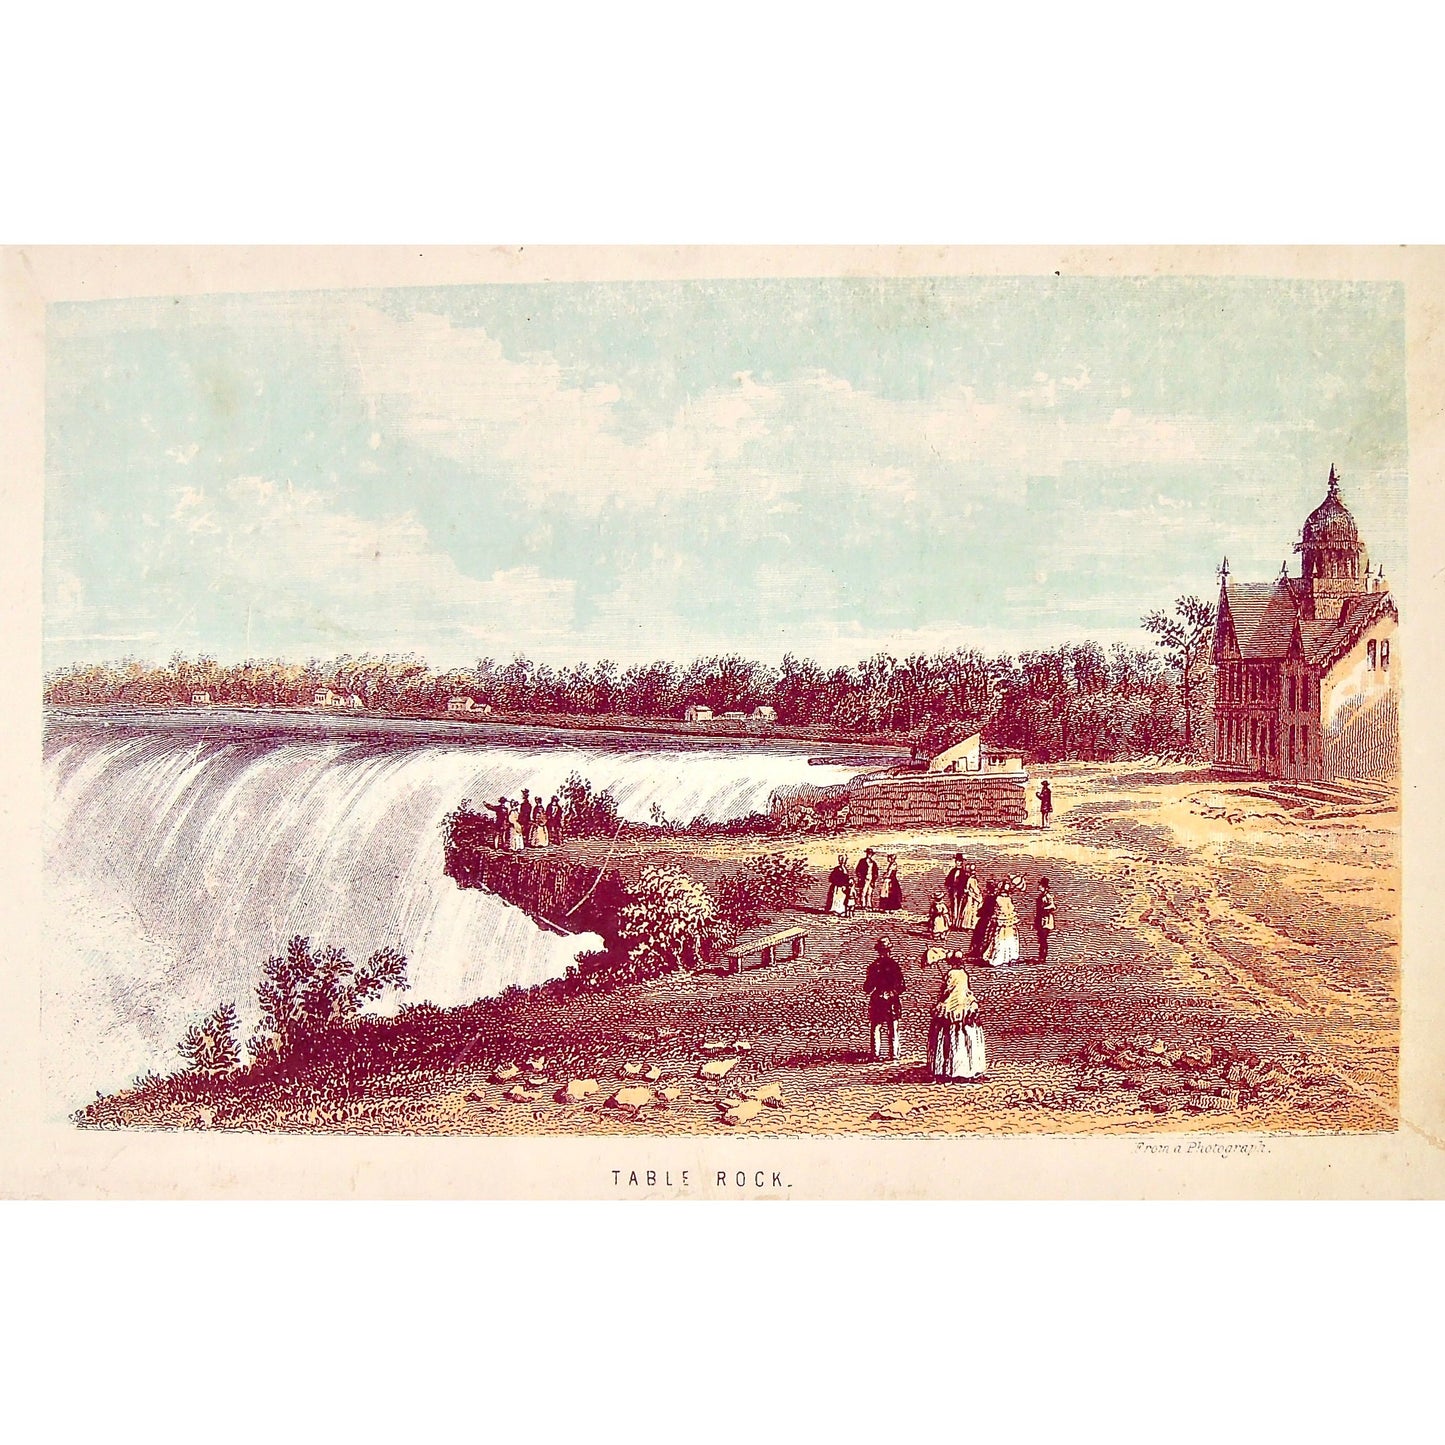 Original antique print in colour of Table Rock, Niagara Falls, from a Photograph for sale by Victoria Cooper Antique prints 